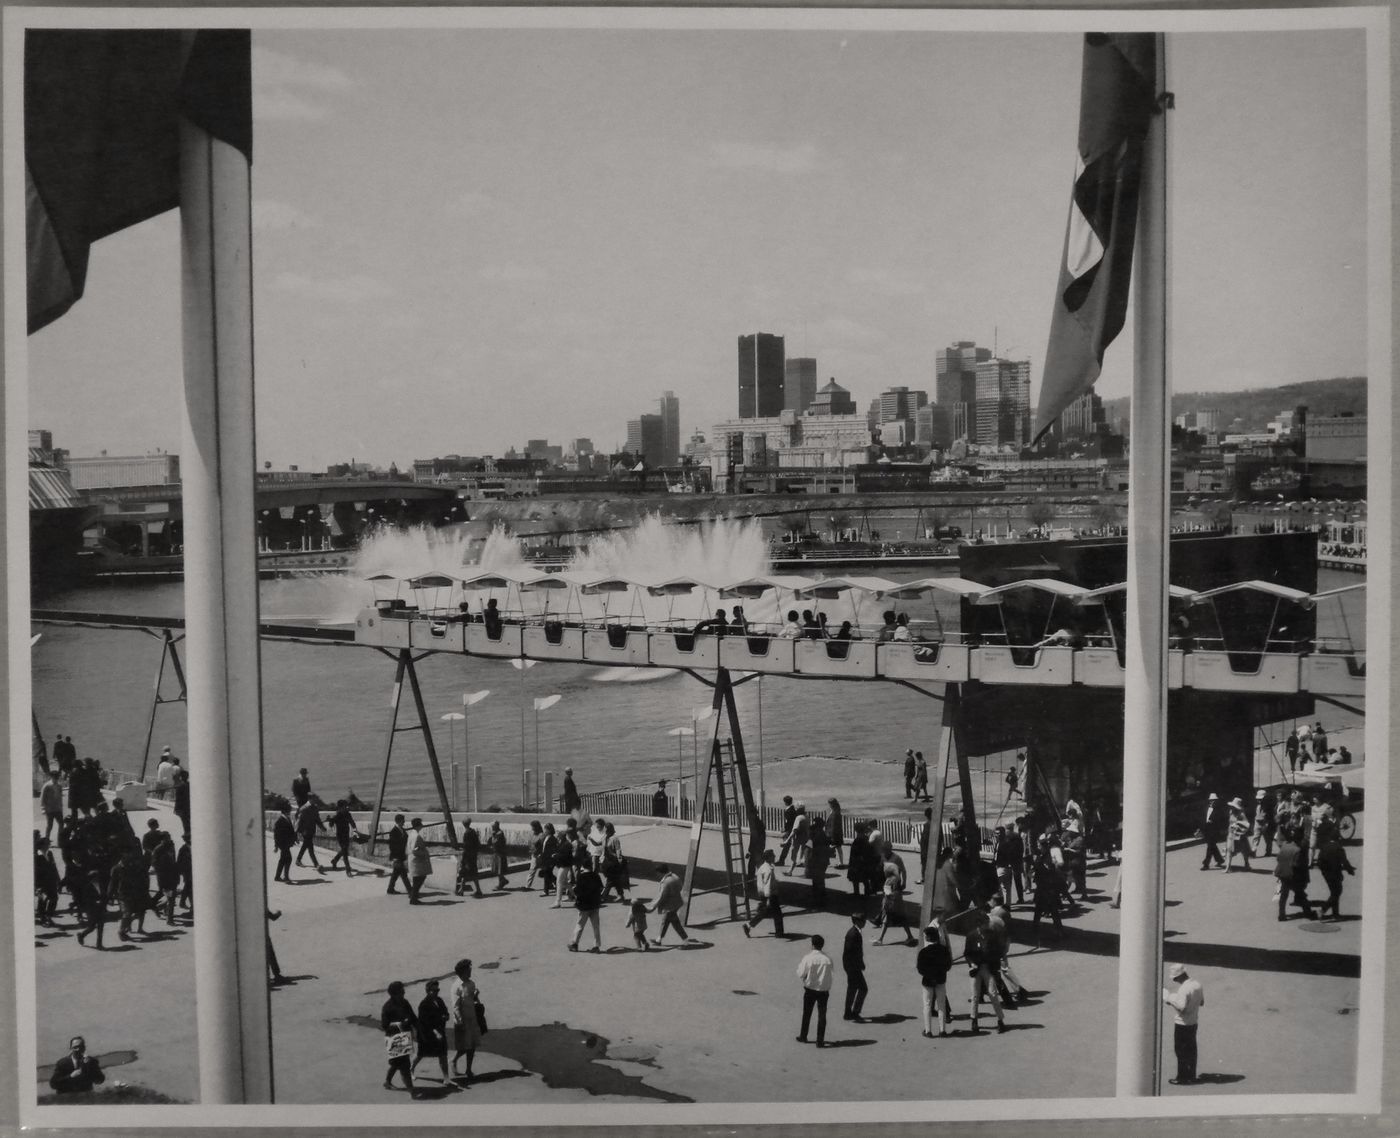 View of the minirail with Montreal in background, Expo 67, Montréal, Québec